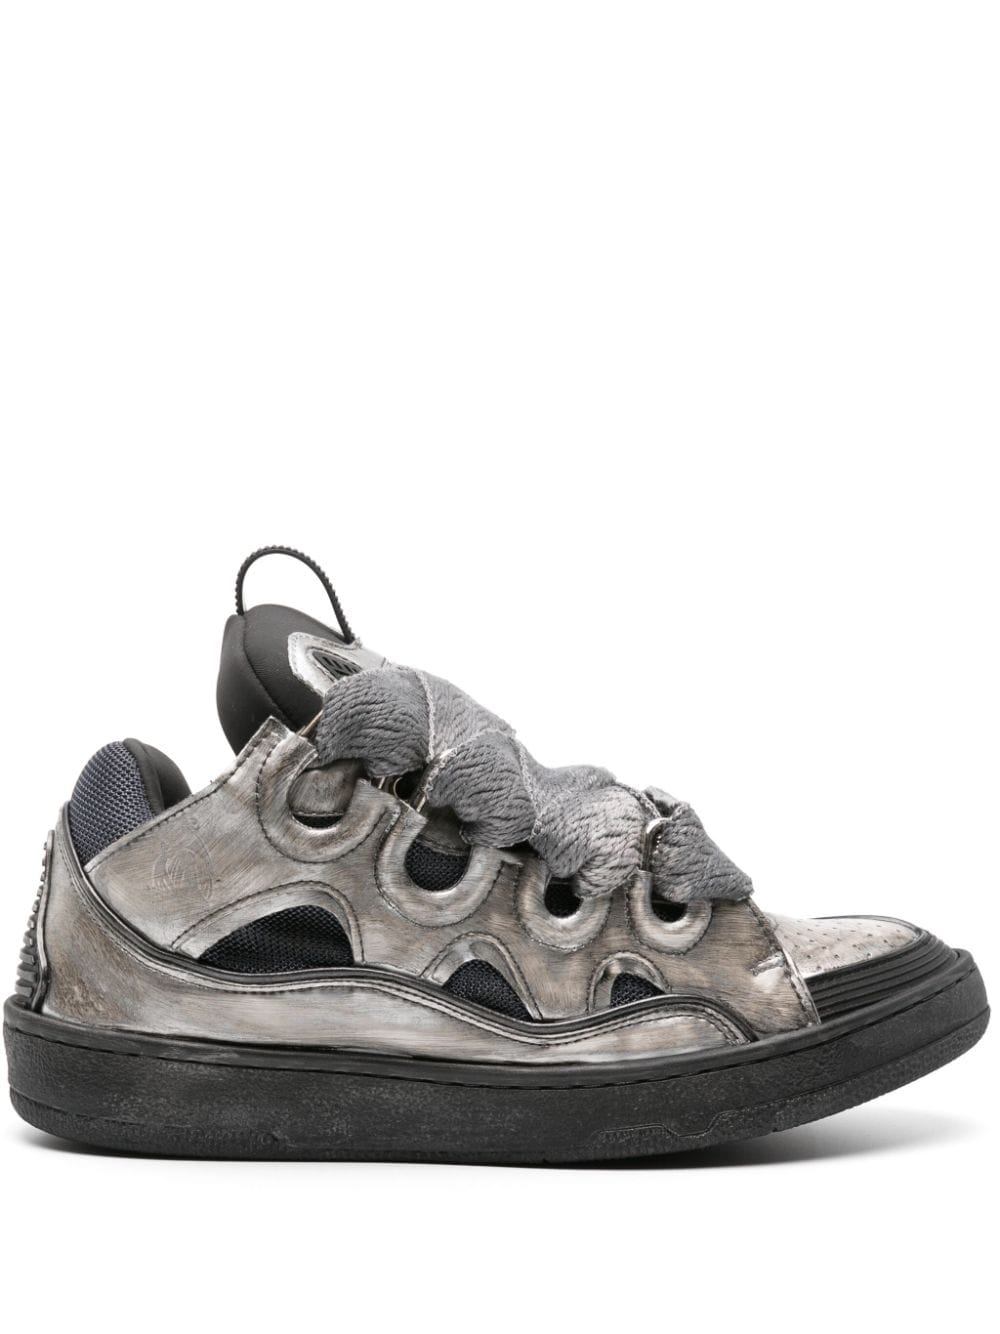 Lanvin Curb Chunky Leather Sneakers In Silver